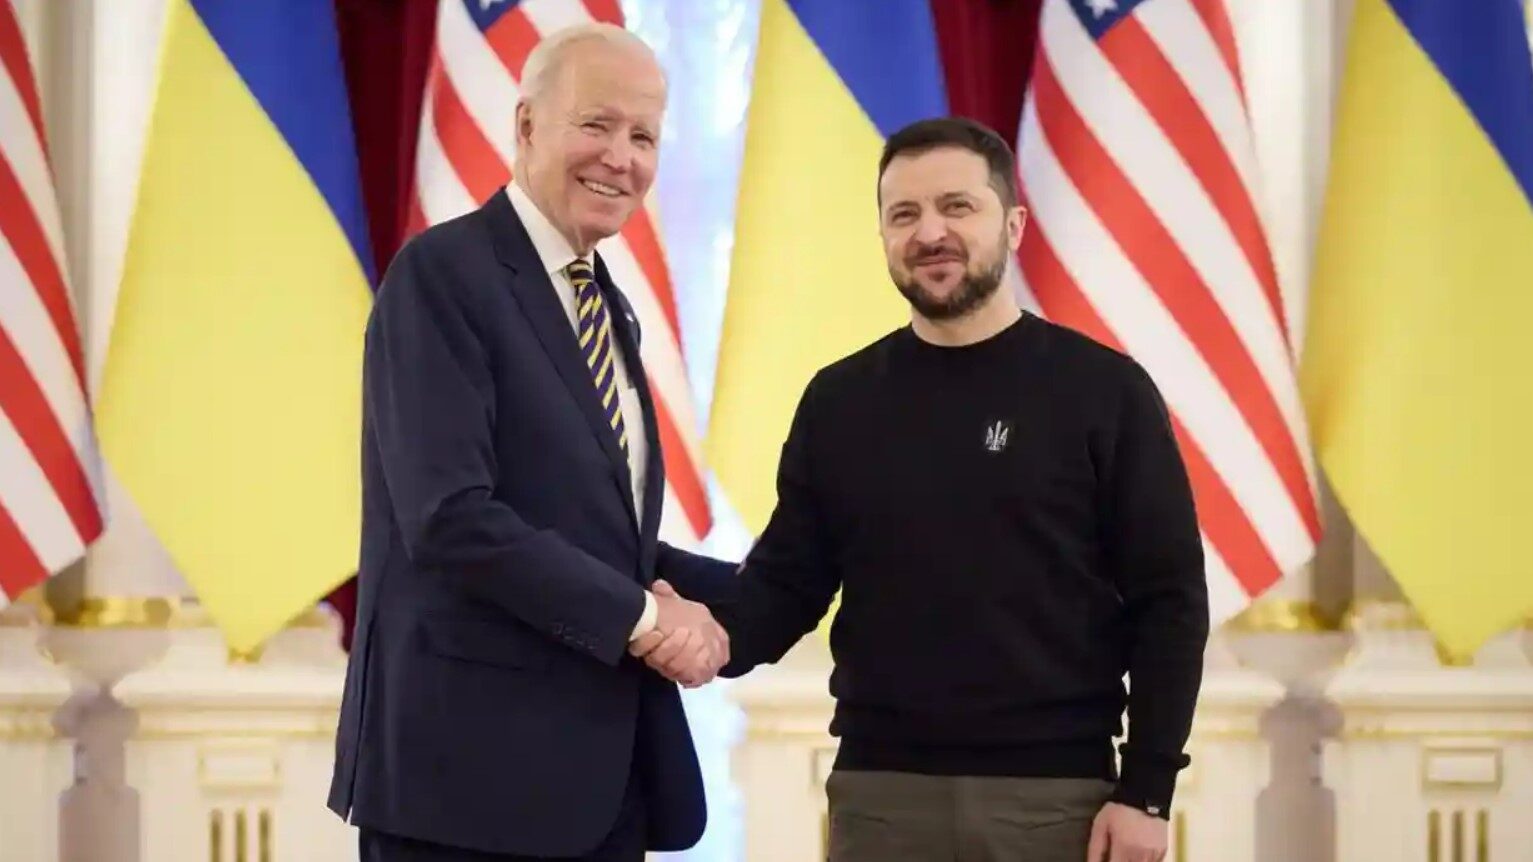 Biden Meets With Zelenskyy on Unannounced Kyiv Visit